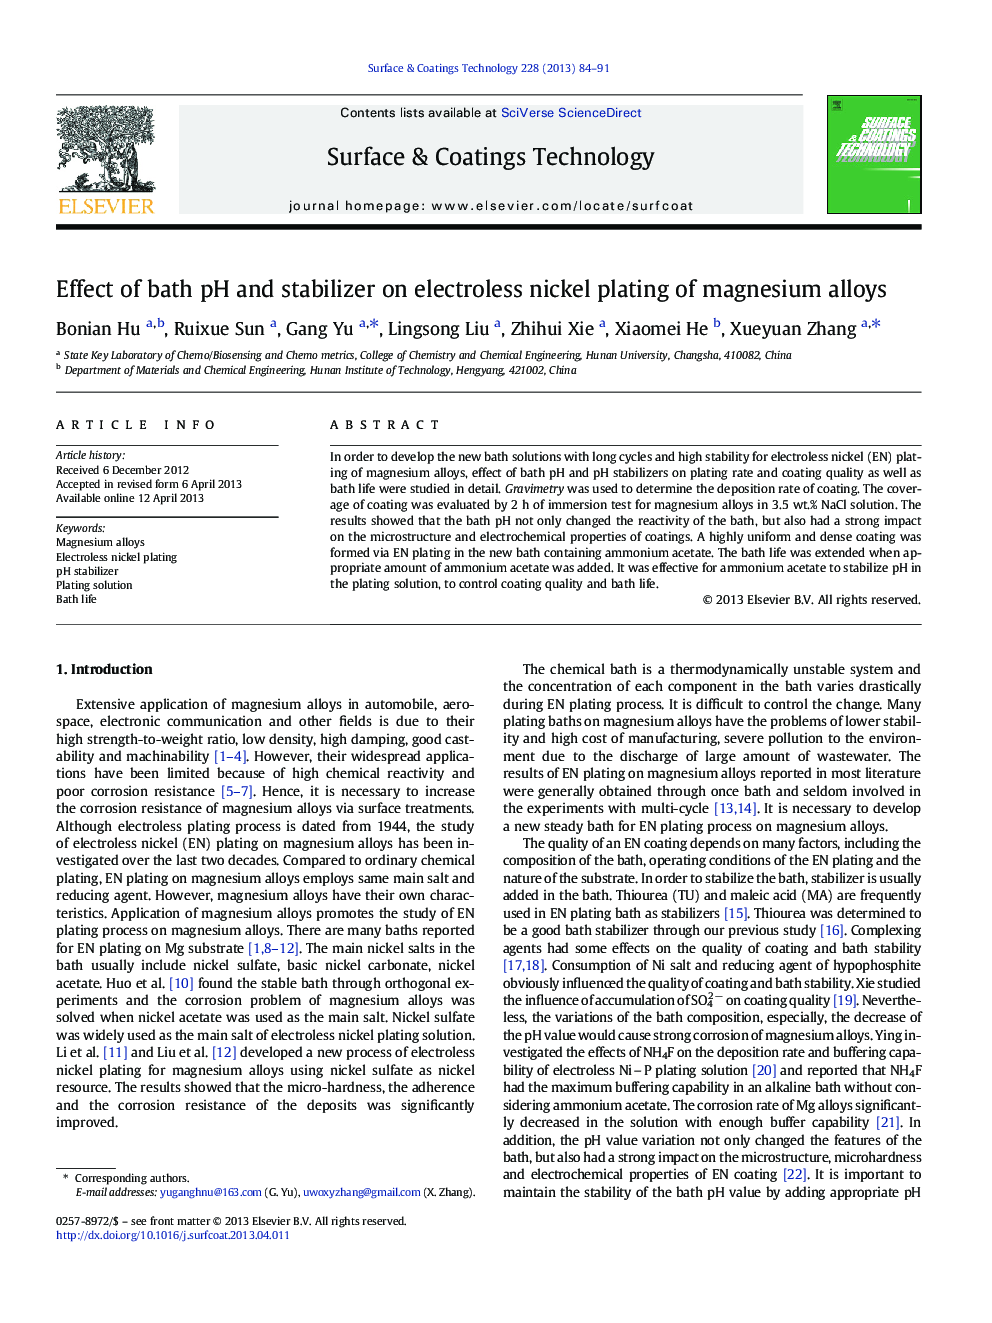 Effect of bath pH and stabilizer on electroless nickel plating of magnesium alloys